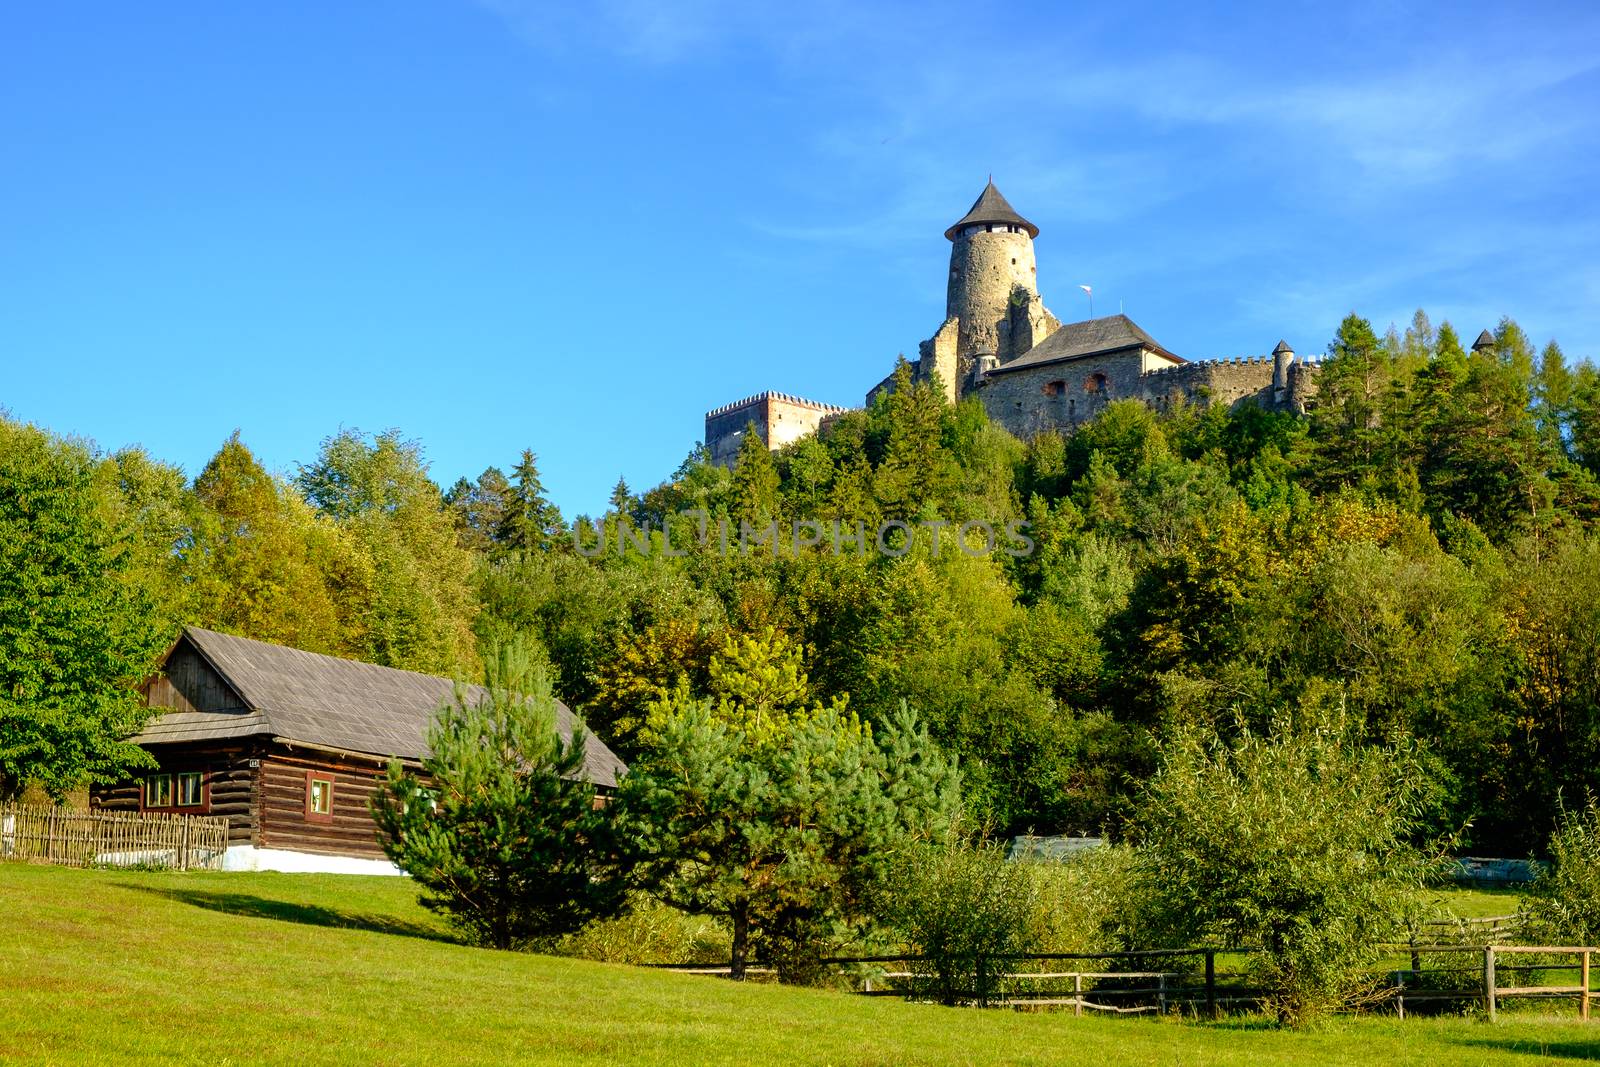 Landscape view of old traditional house and castle in Stara Lubovna, Slovakia, Eastern Europe